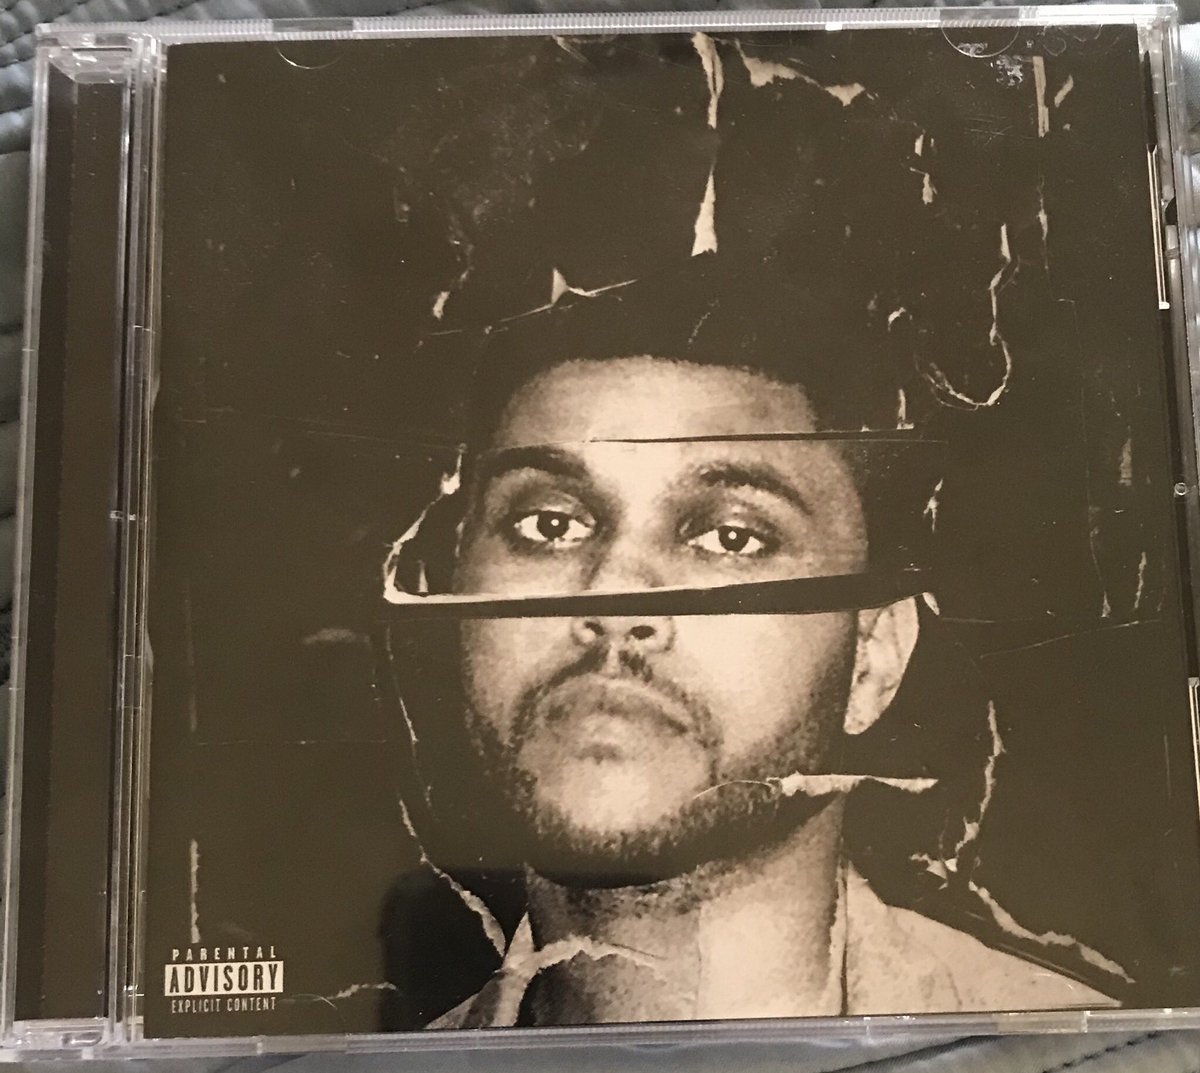 #9: Beauty Behind The Madness by The Weeknd. My introduction to him and an 18th birthday gift to me